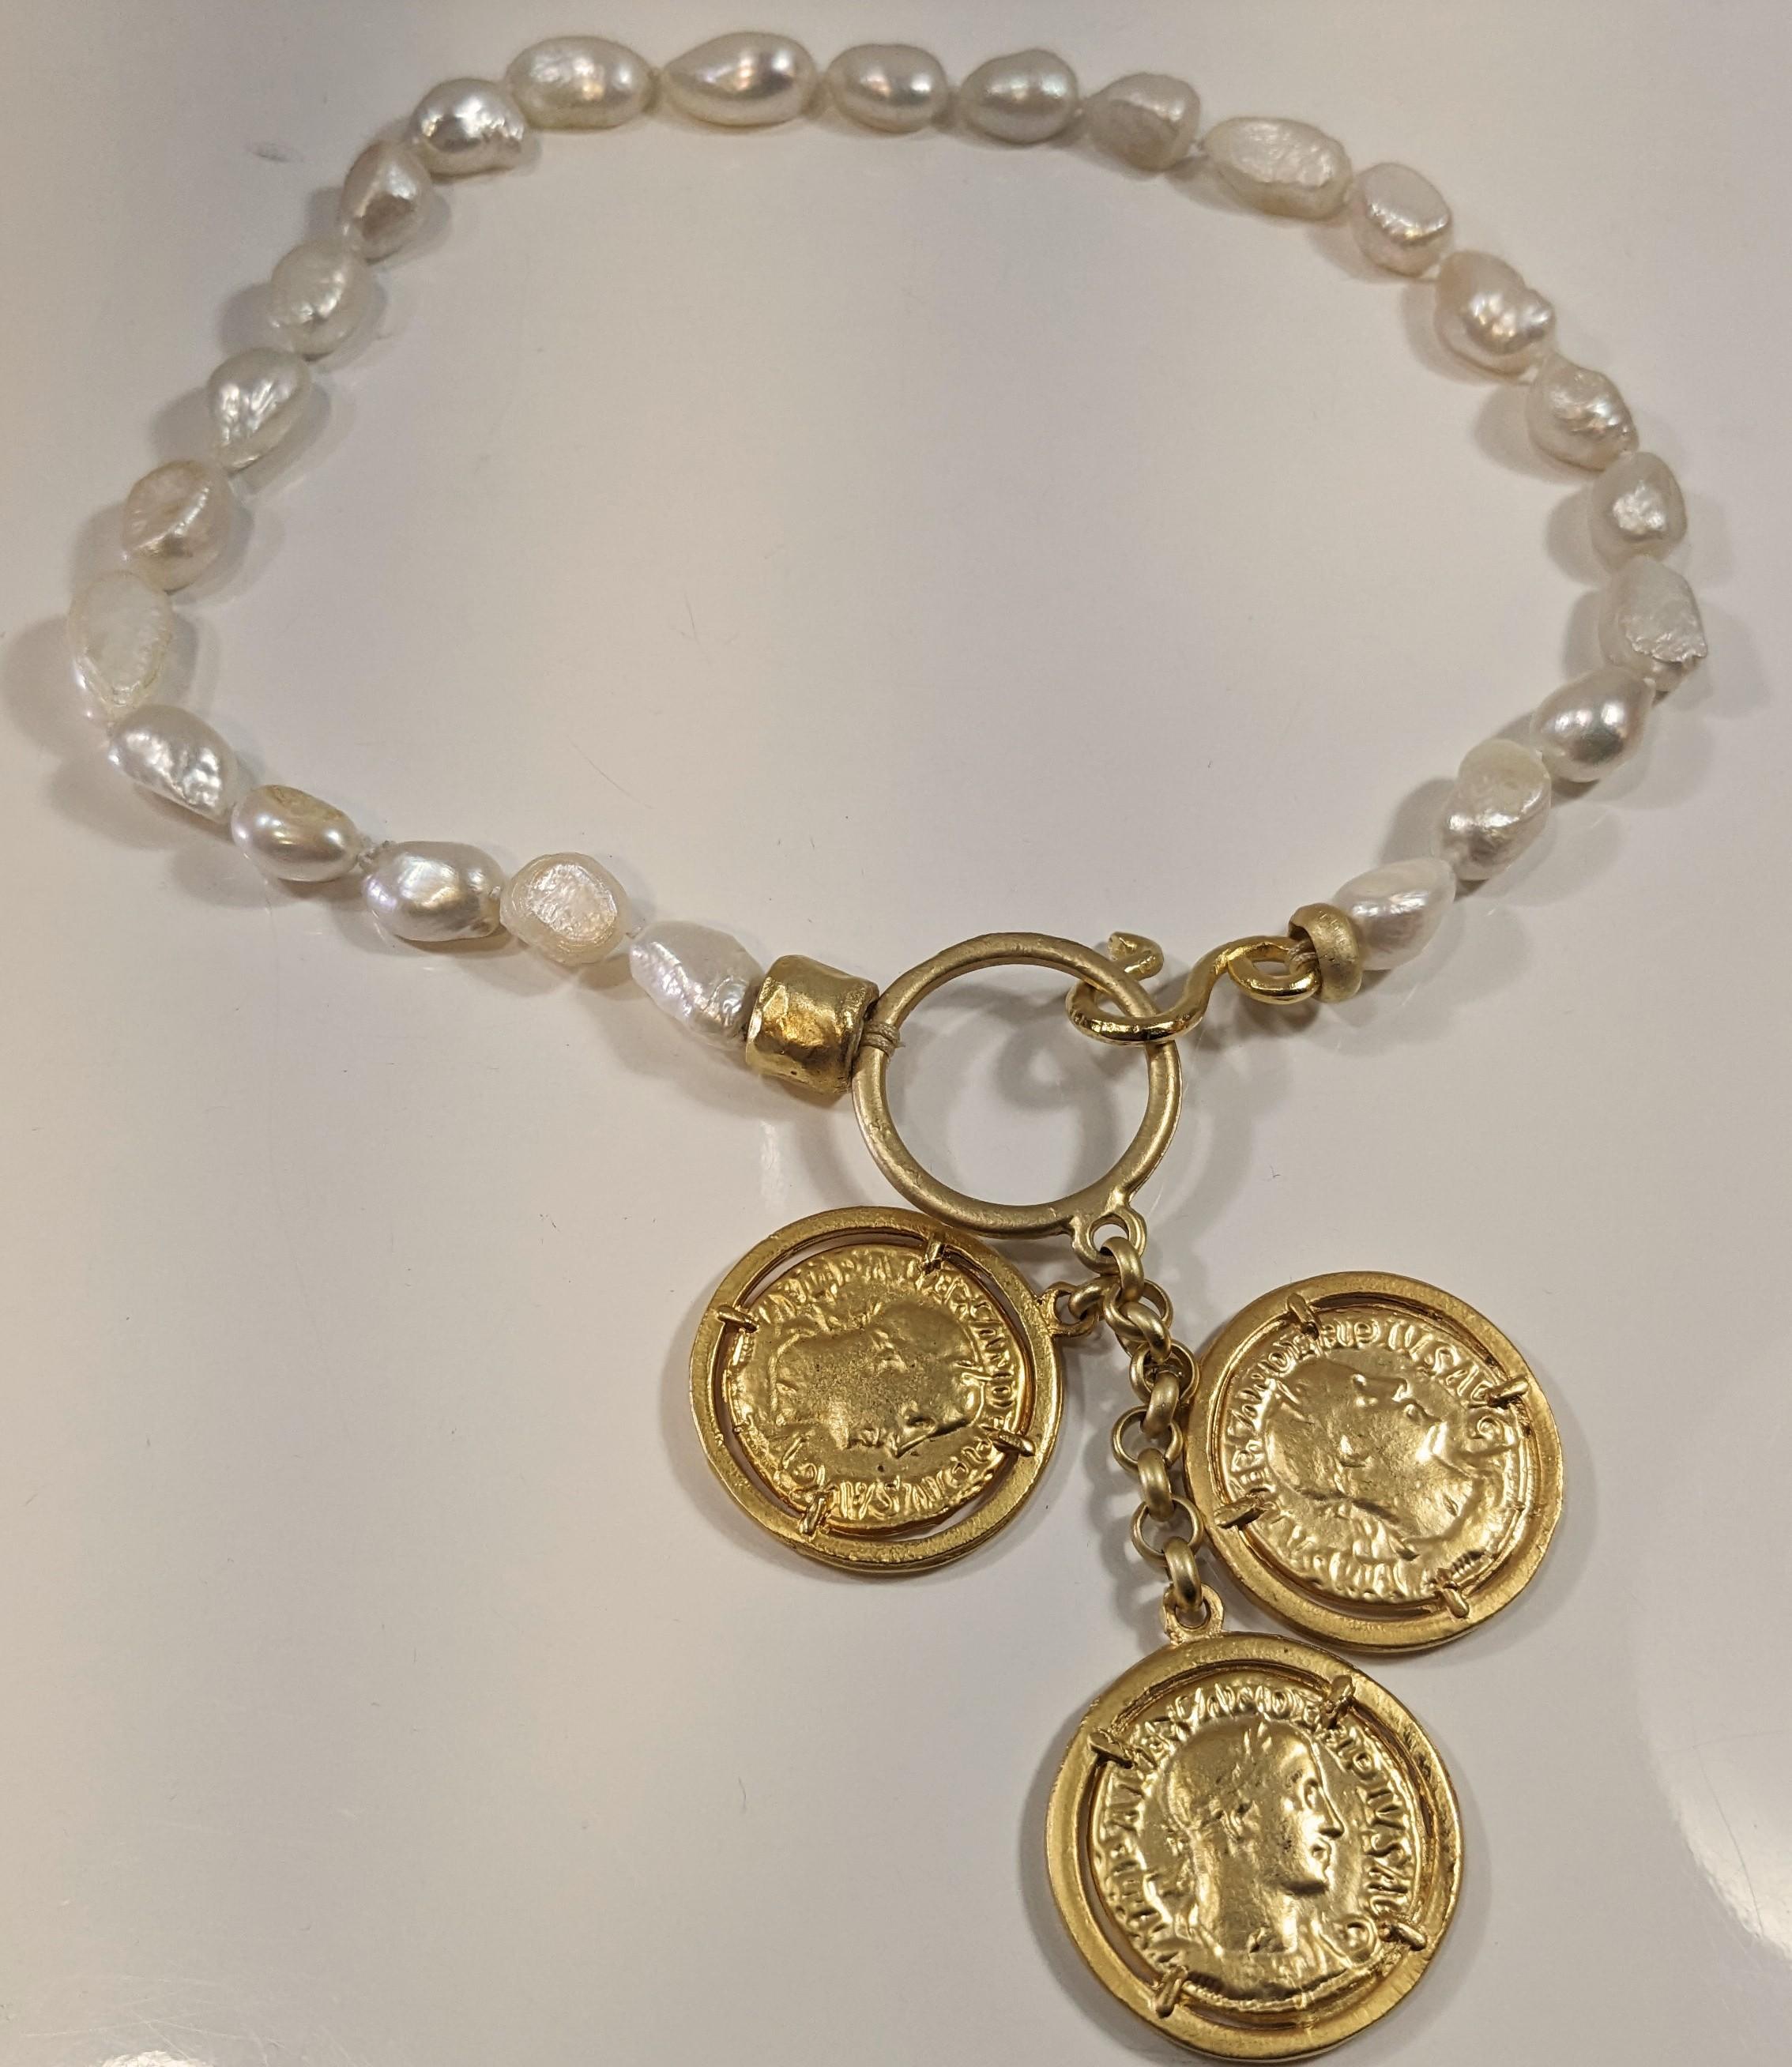  Short Necklace of White River Pearls with Central Hoop and Trio of Coins
 It has a central S-shaped closure. All in 18 karat matte gold
Neck measurement  42cm (16,53 inches)
Coin chain length  9 cm (3,54 inches)


Pradera Fashion Division  is